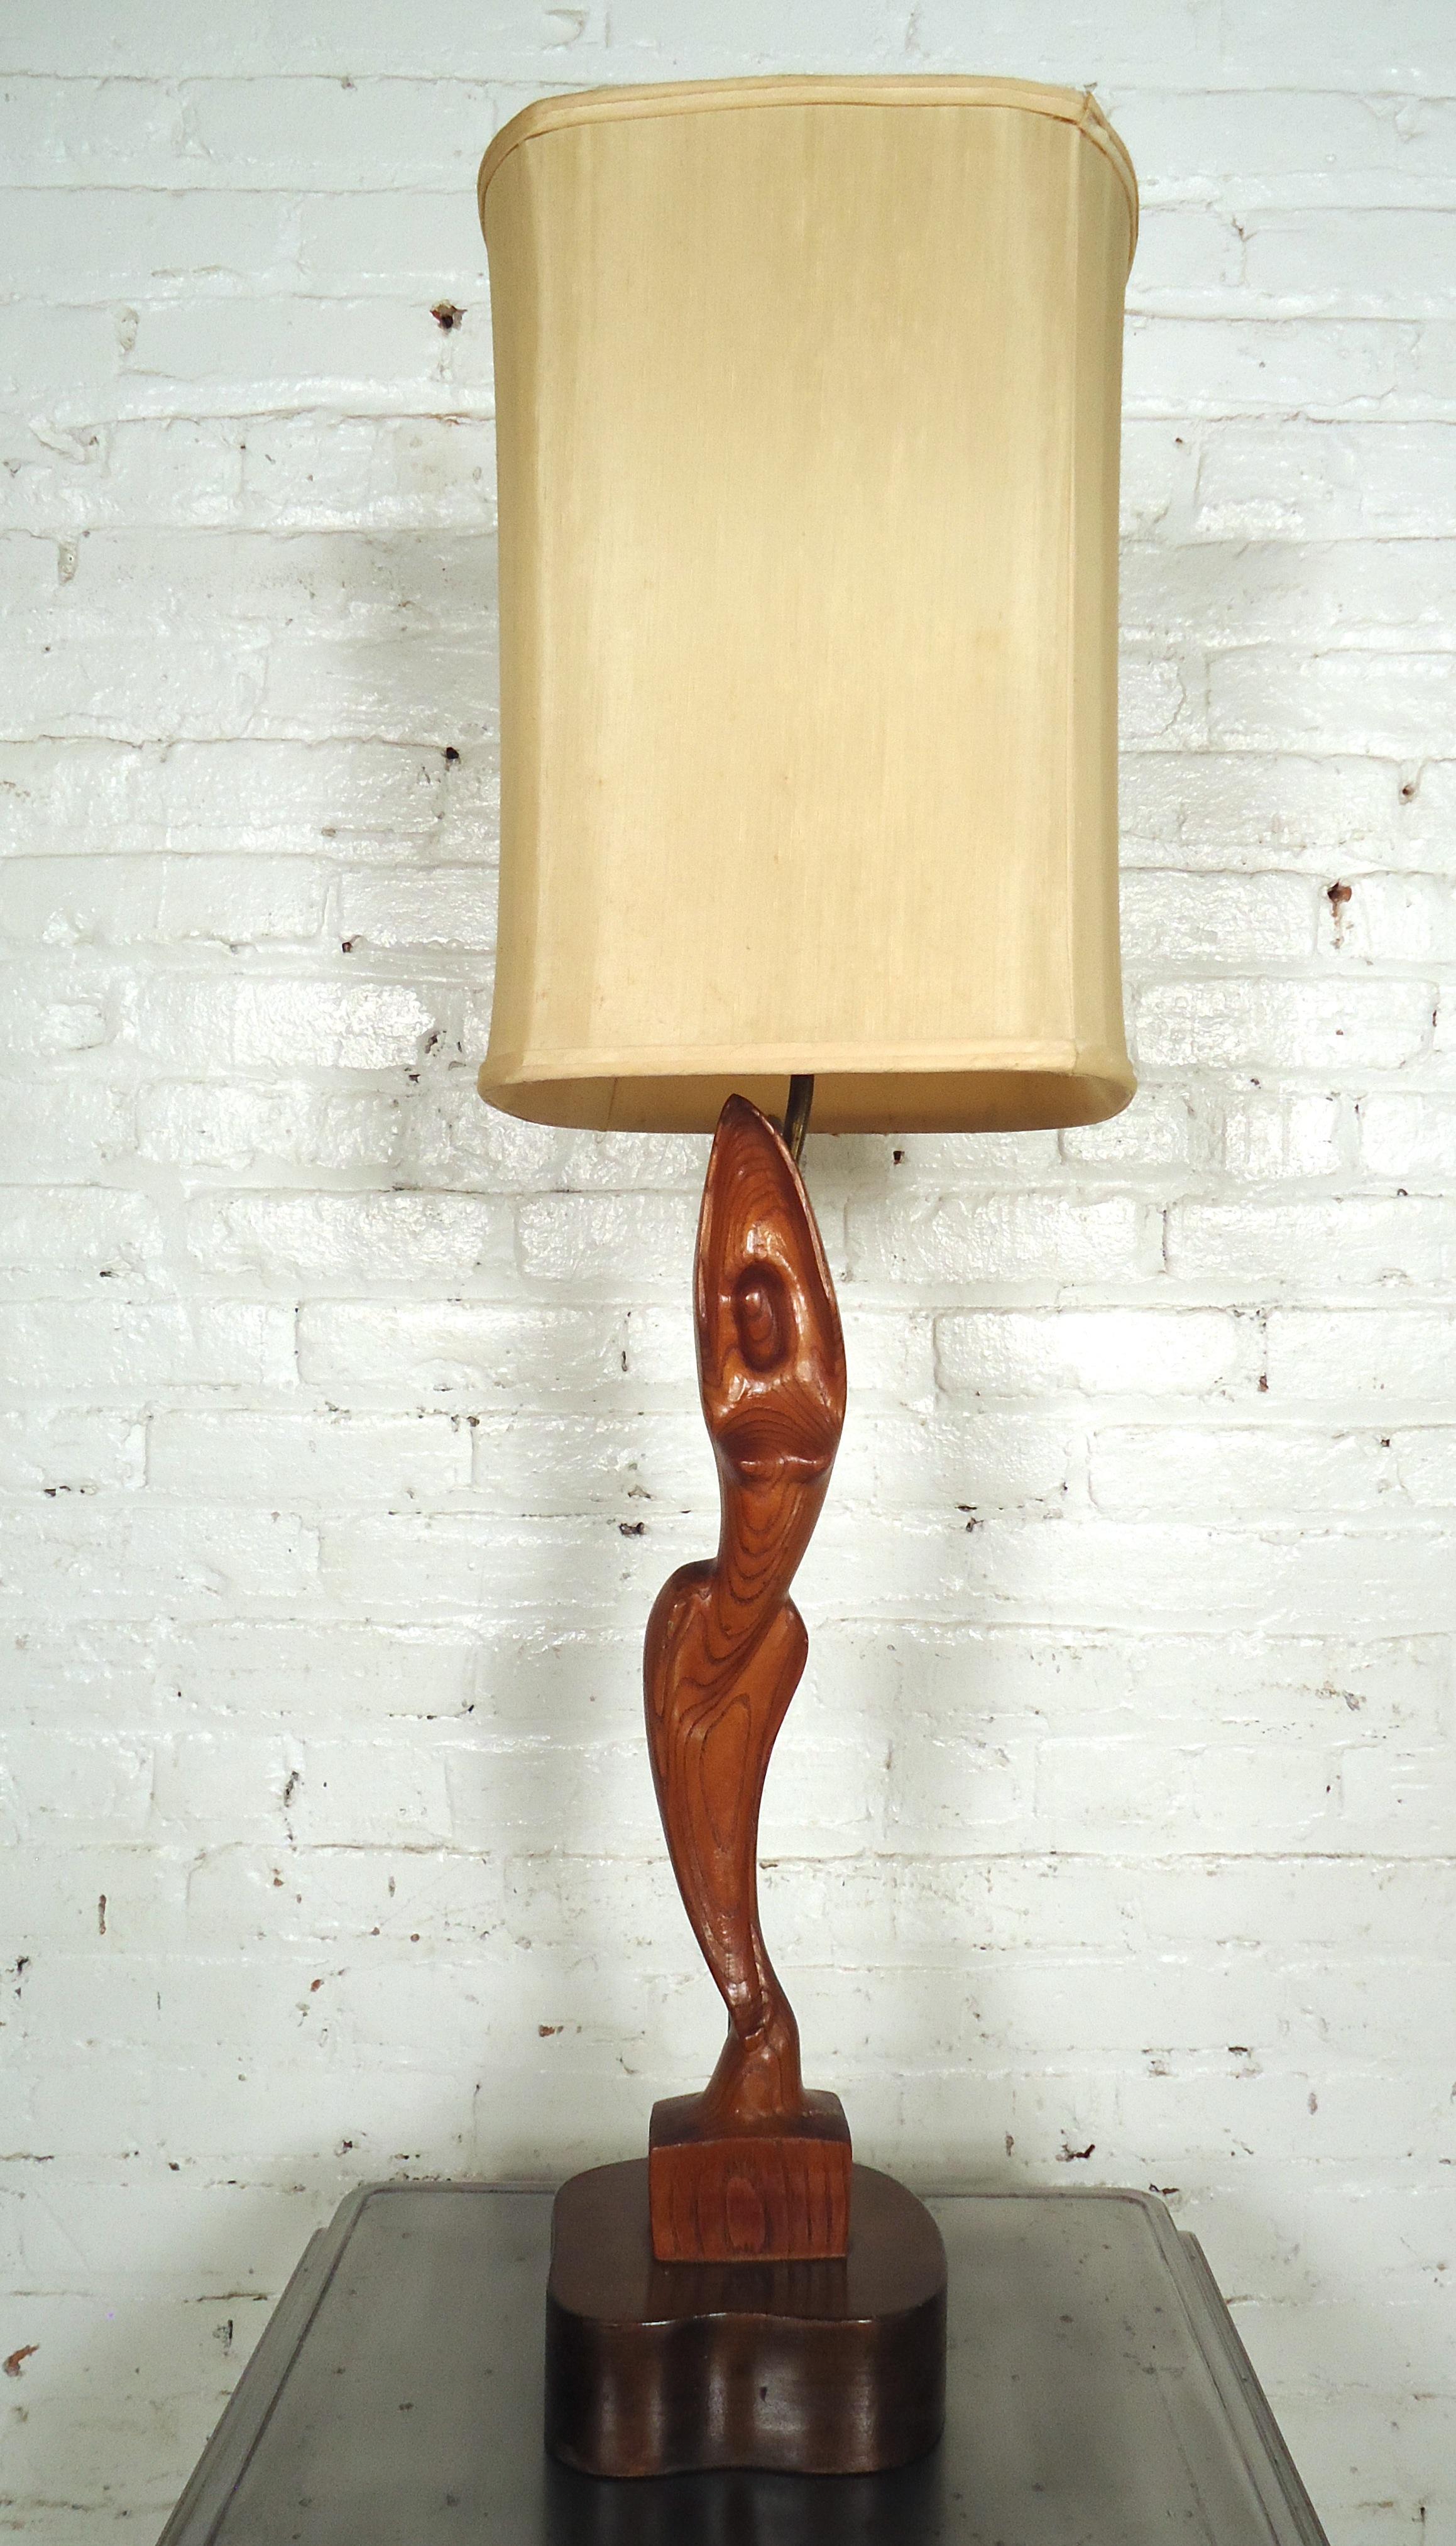 Mid-Century Modern female sculpted table lamp features rich wood grain, solid sturdy base, and shade.
(Please confirm item location - NY or NJ - with dealer).